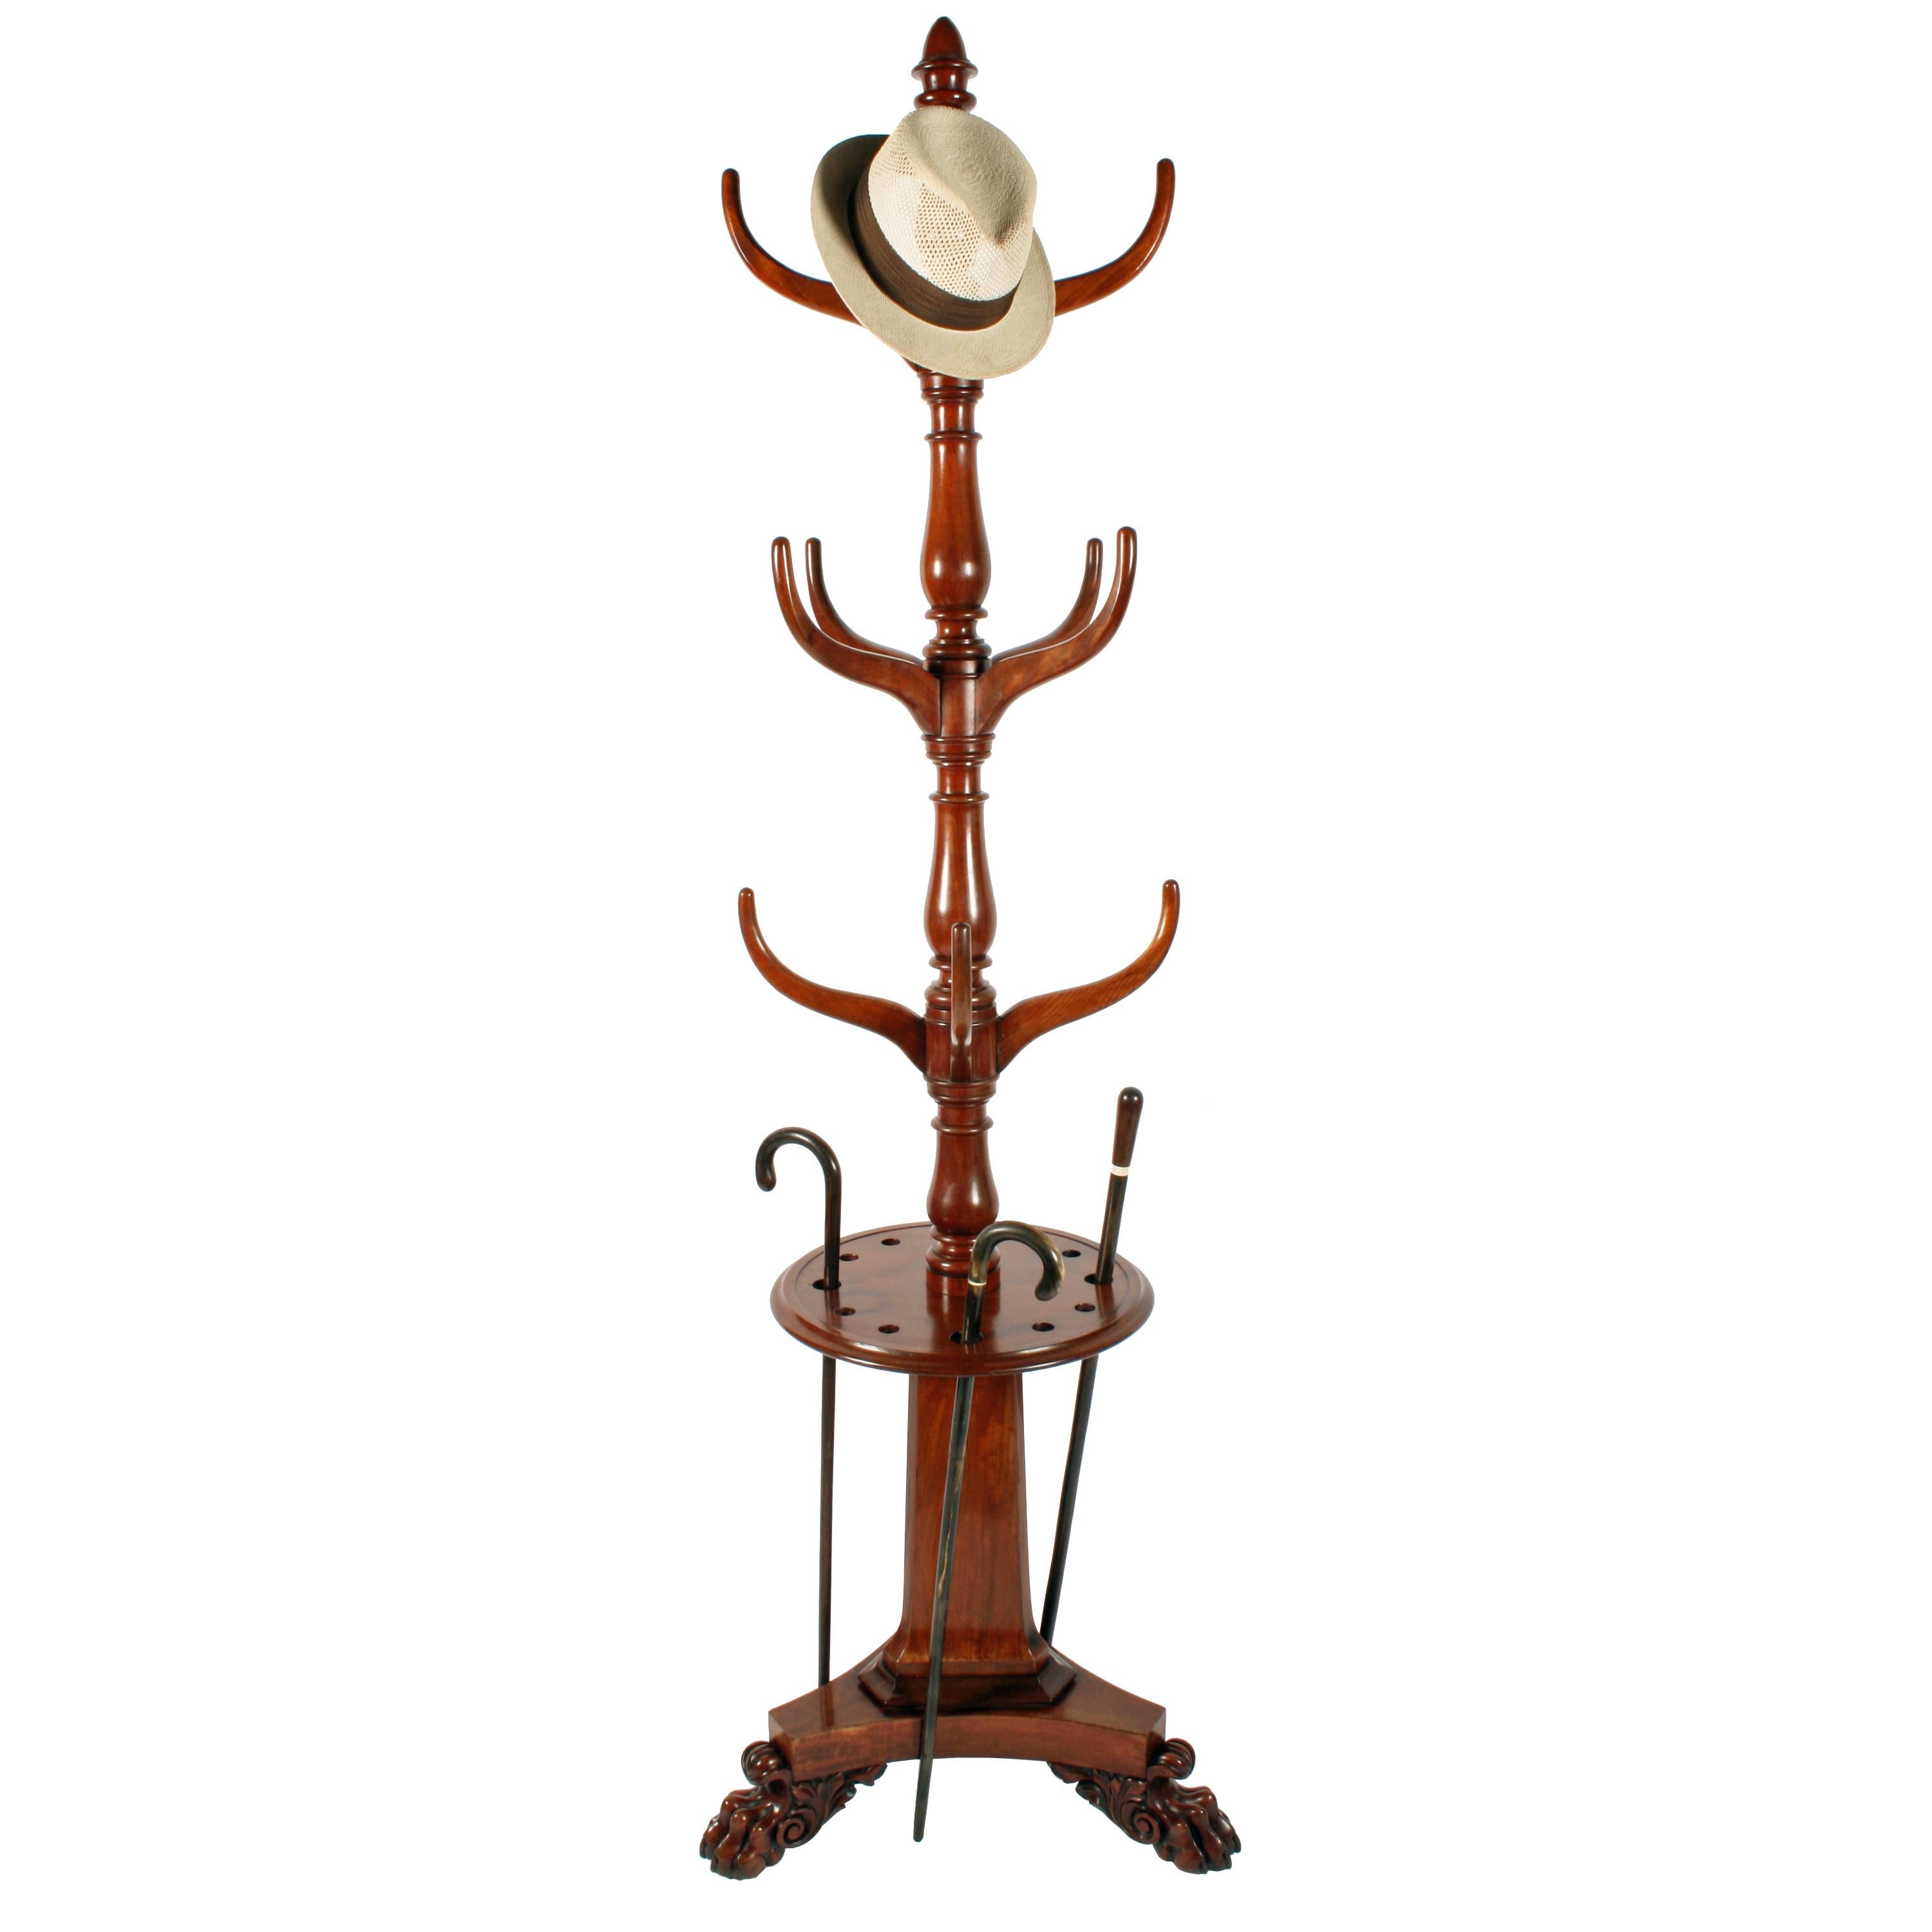 A magnificent 19th century William IV mahogany hall stand.

The stand has a turned centre column with twelve shaped hooks for hats and coats and is topped with a finial.

The stand has a triangular concave sided platform base that is raised on